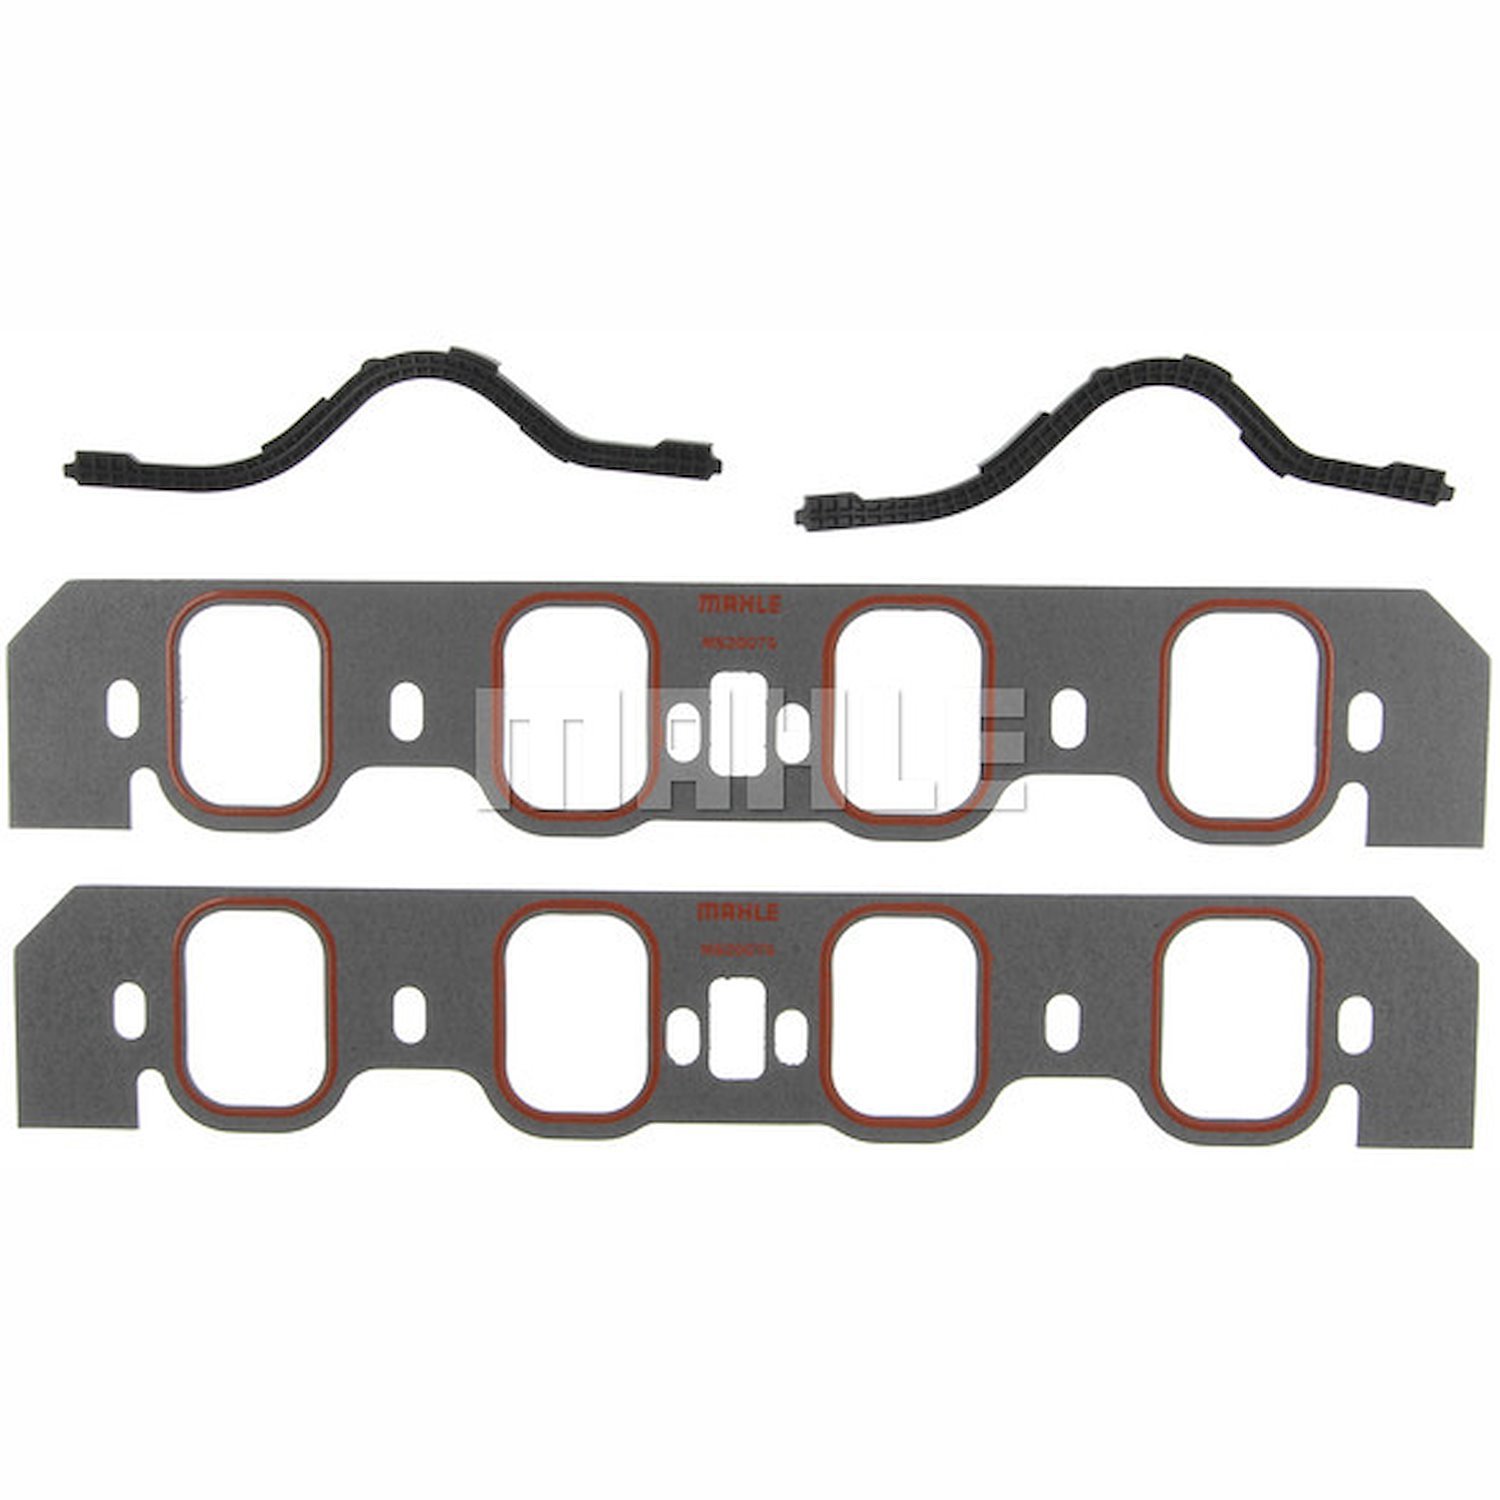 Intake Manifold Gasket Set for Ford Cleveland/Modified 4-BBL